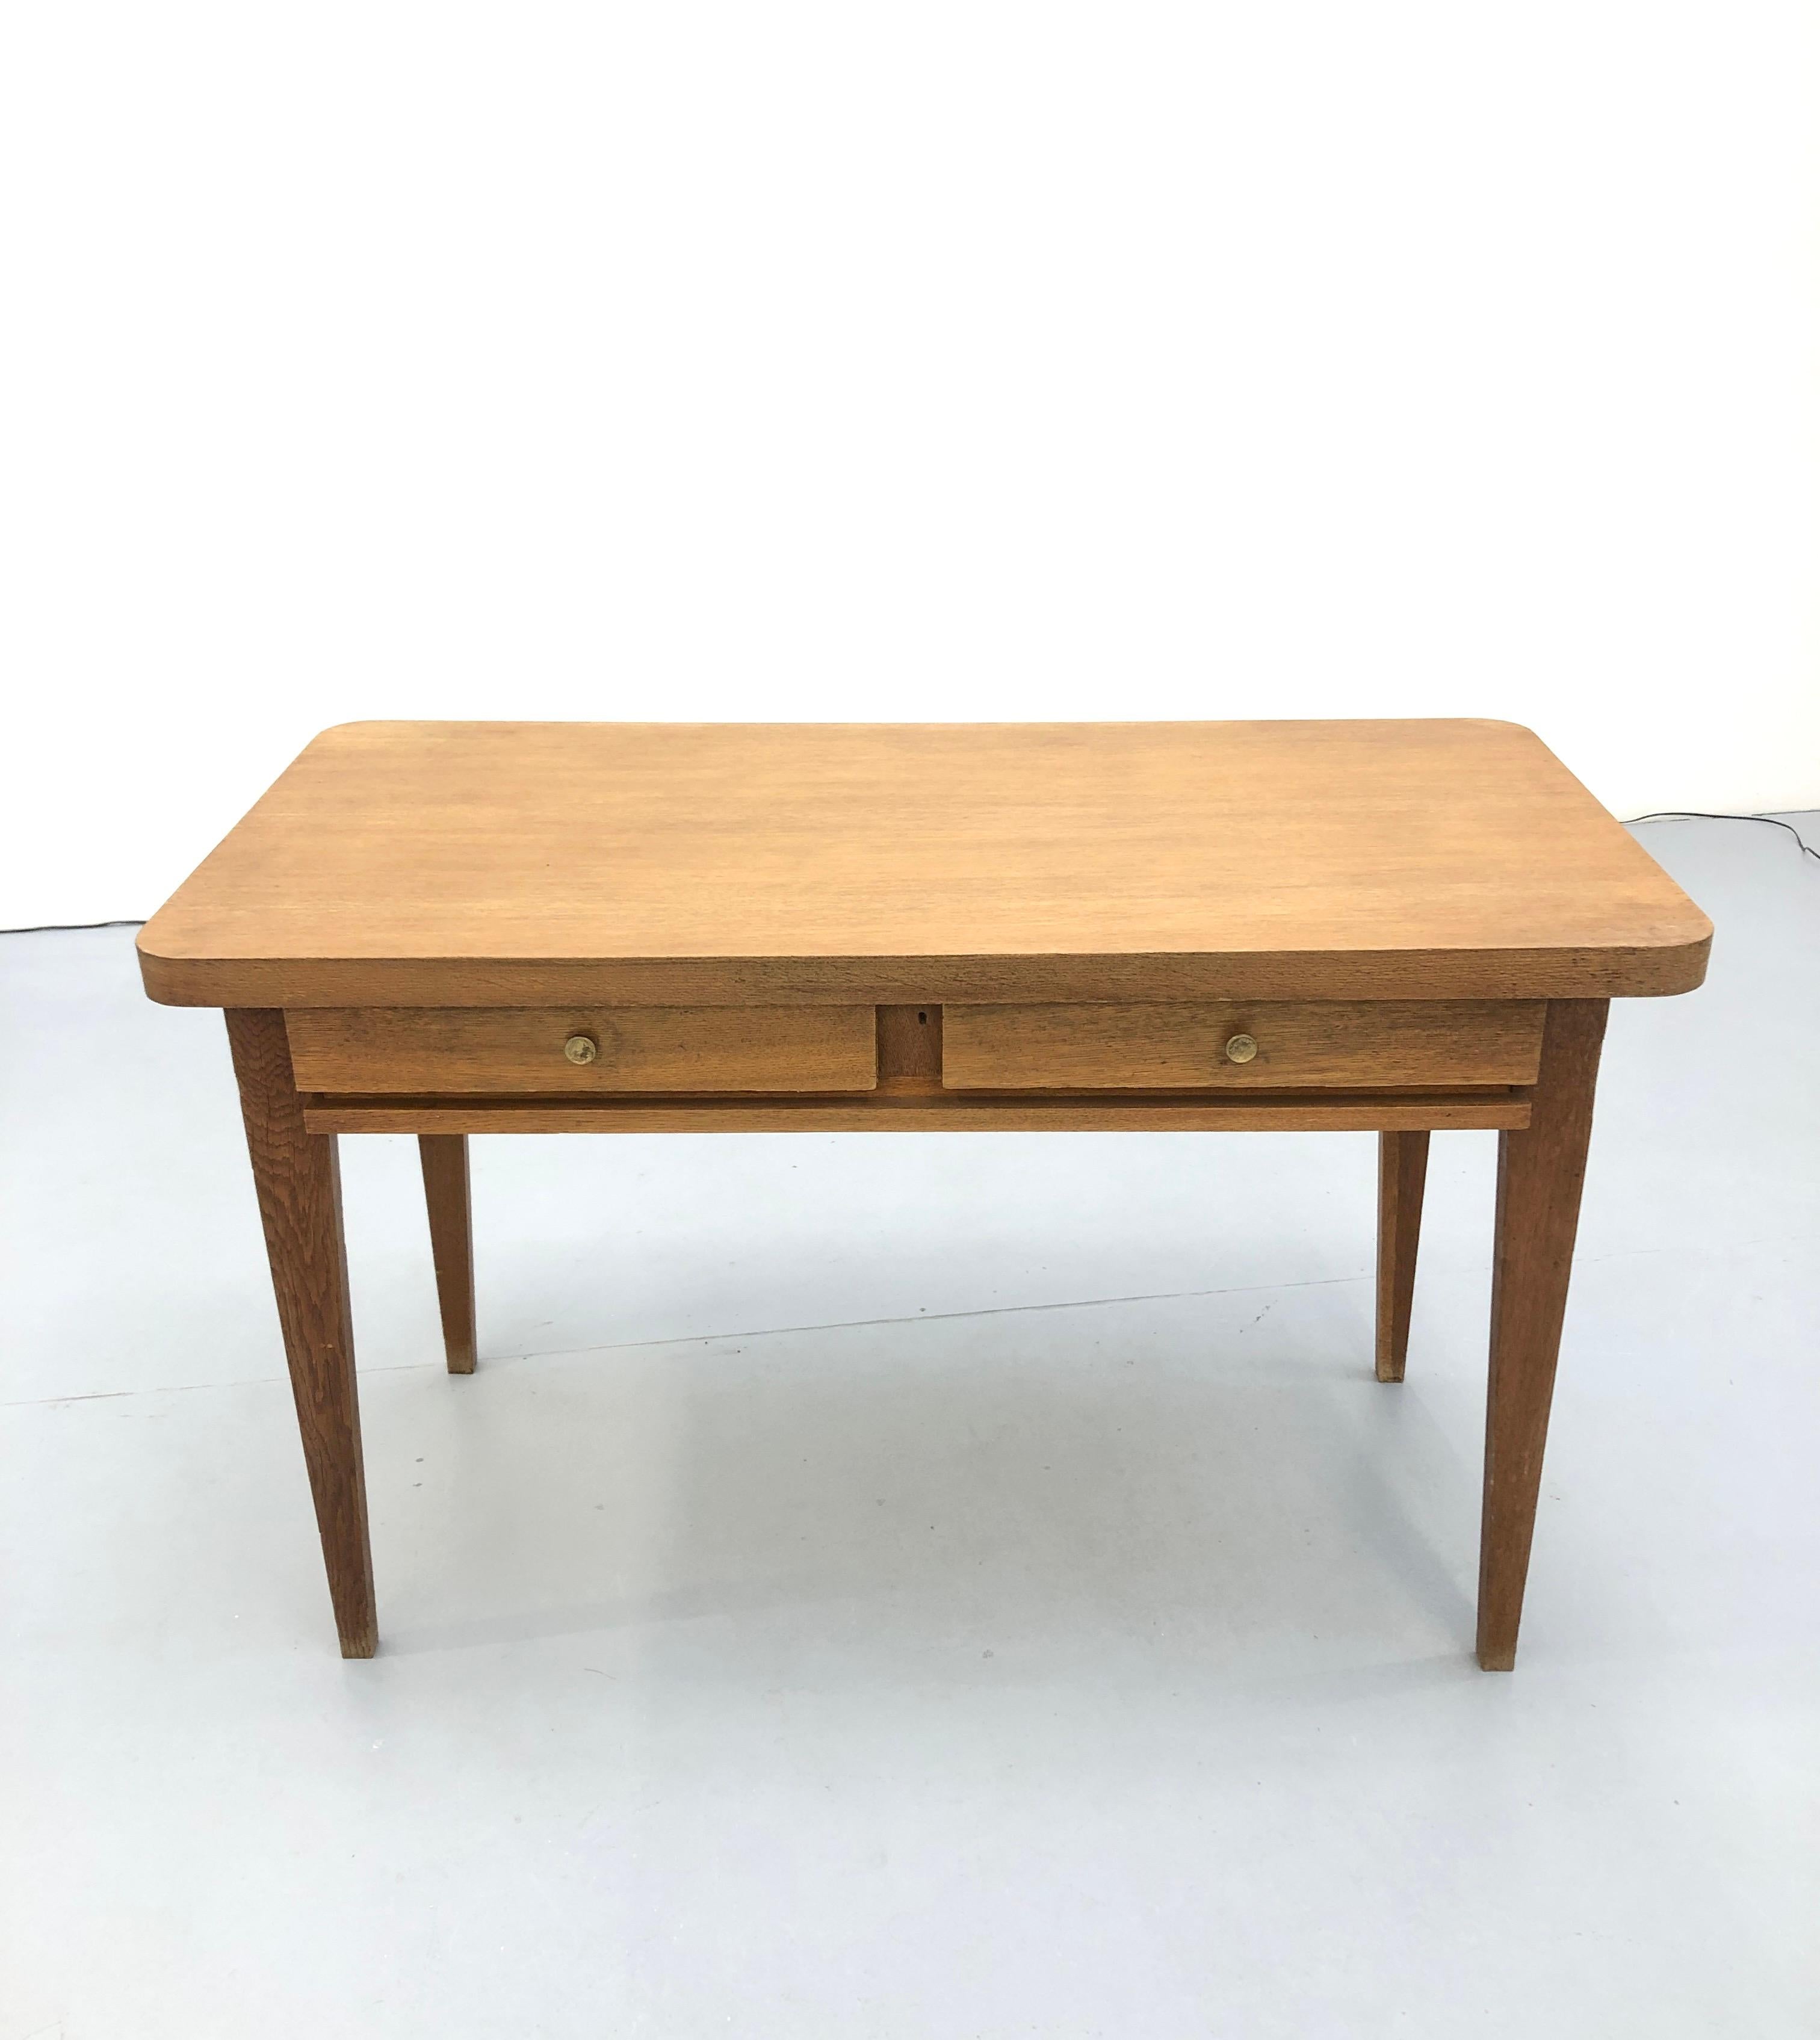 Desk with shelf and drawers by René Gabriel, 1950

This desk is one of the last pieces designed by the greatest designer of the French Reconstruction: René Gabriel (1899-1950). 

René Gabriel (1899 - 1950) is a precursor of French industrial